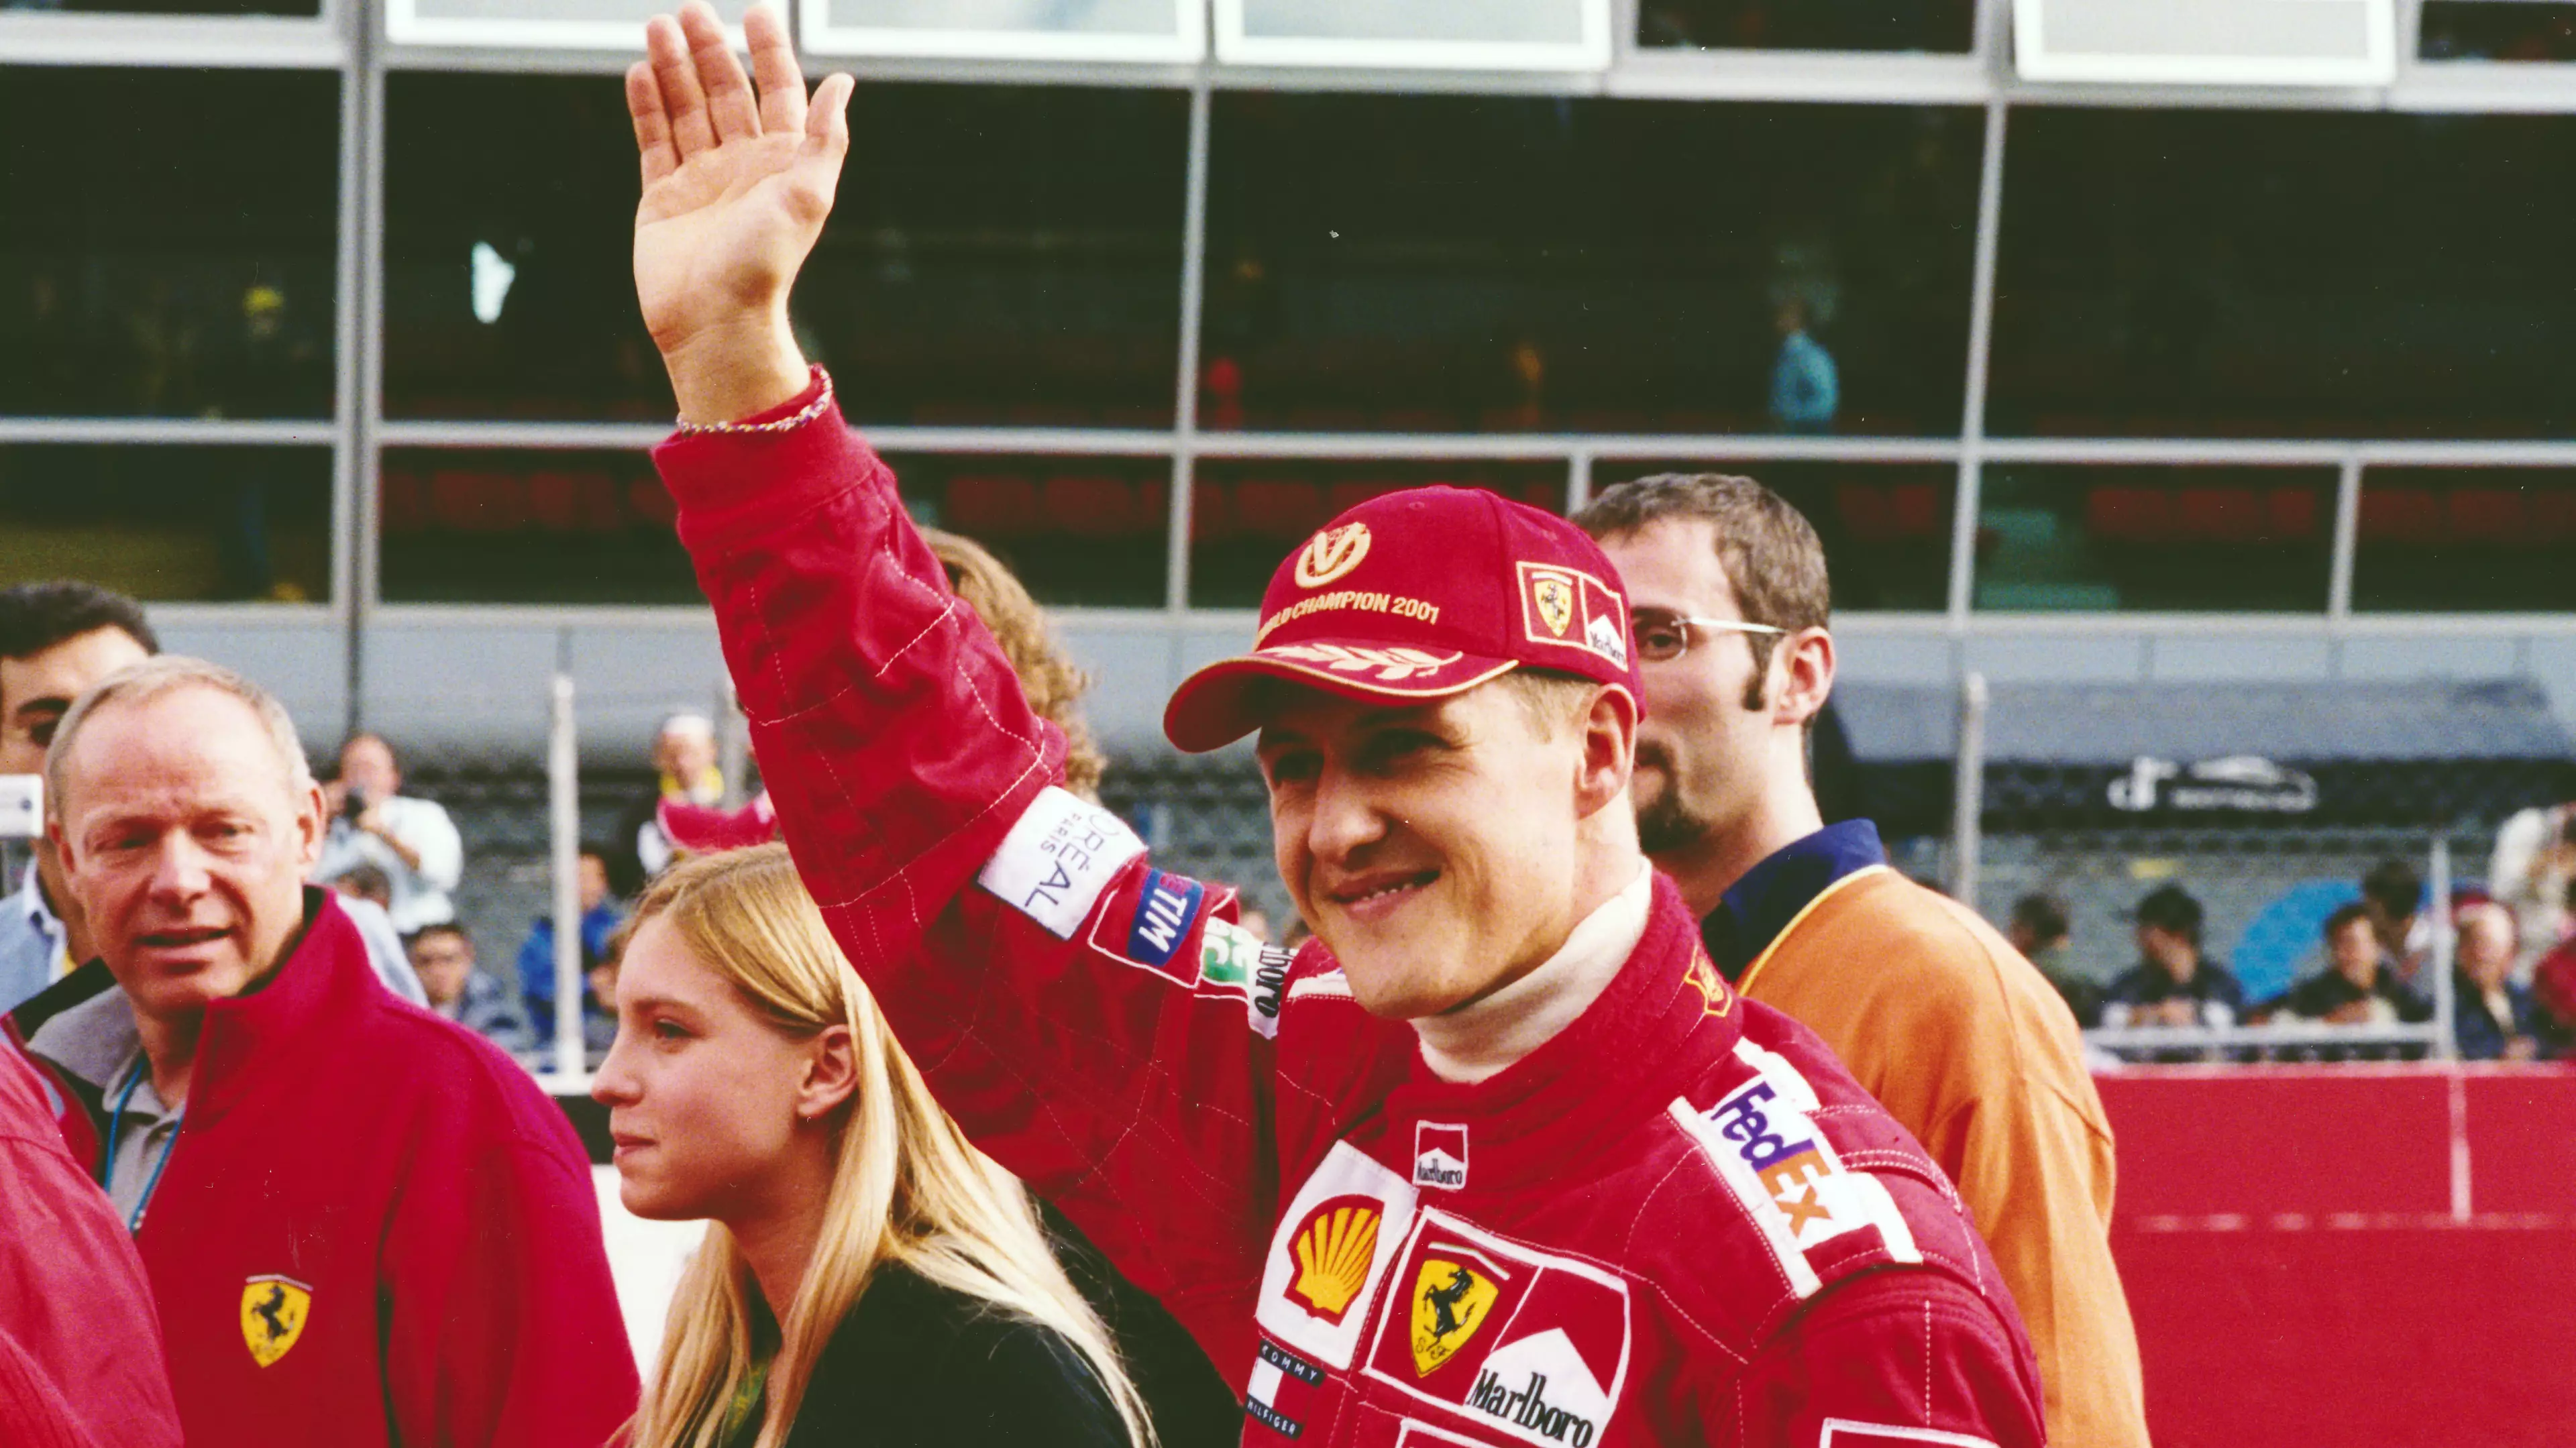 Michael Schumacher's Family Set To Take Part In New Documentary 